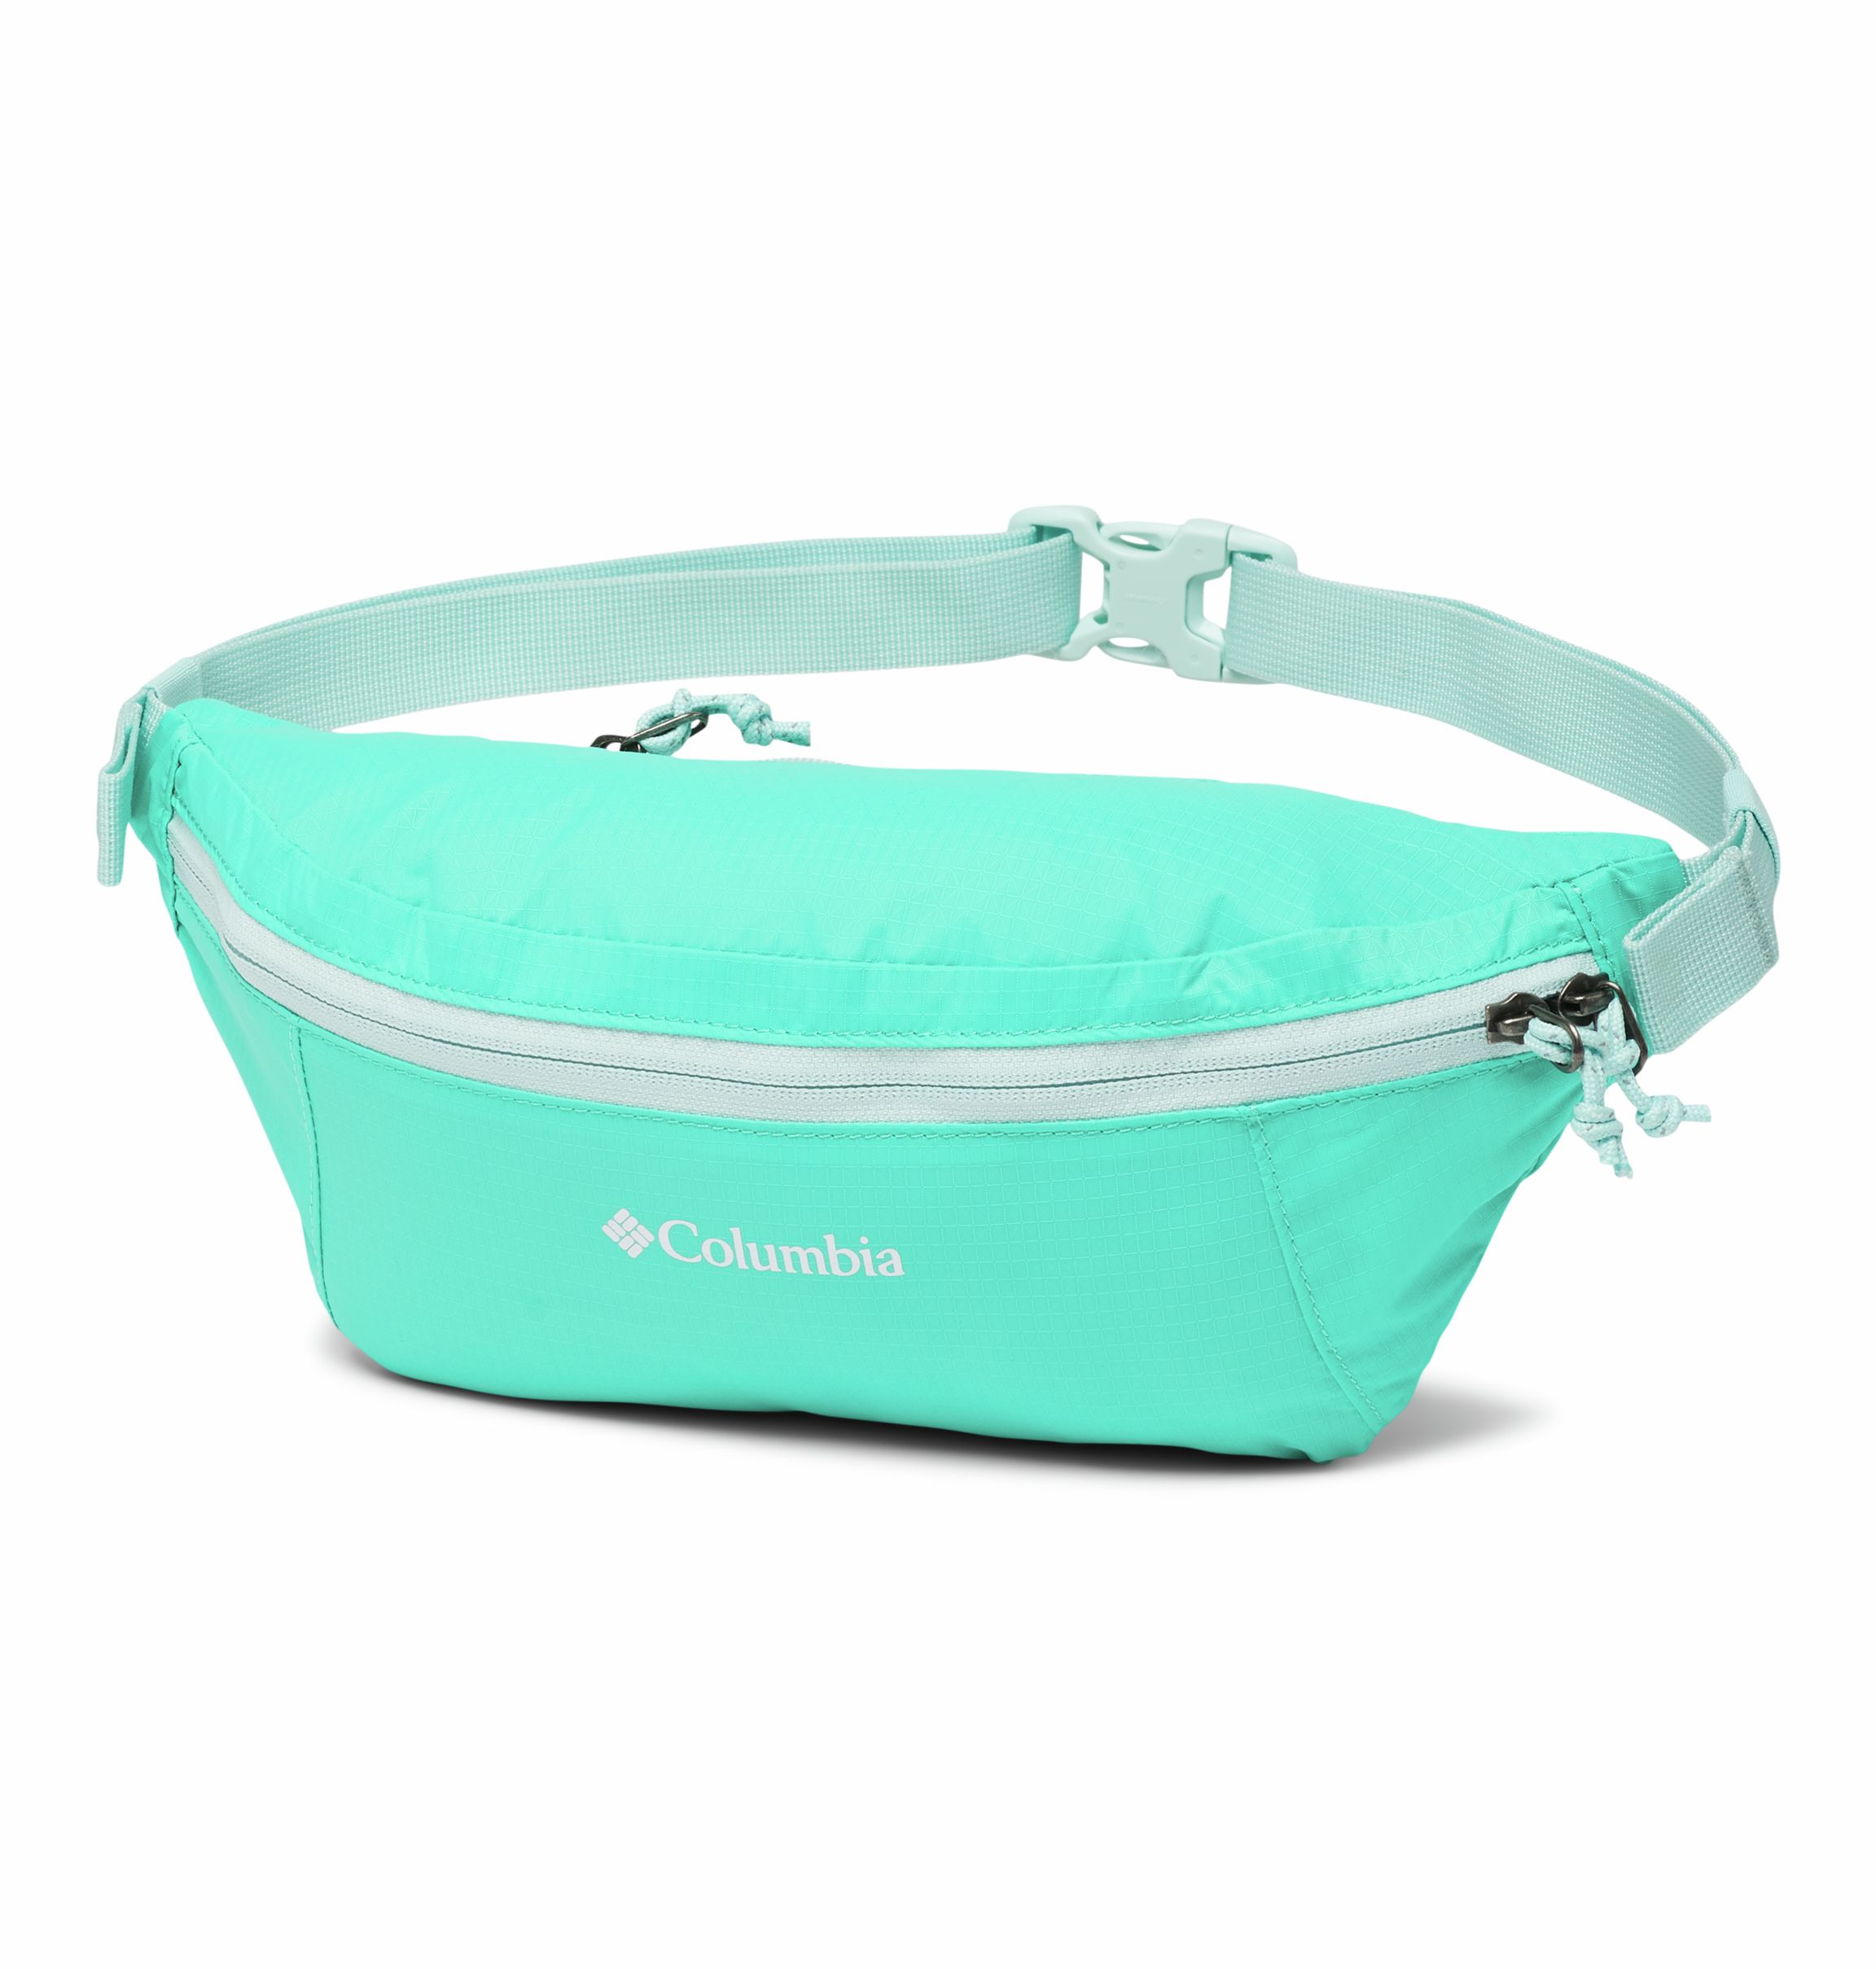 turquoise color Made in USA. Fanny pack,waist pack medium size 